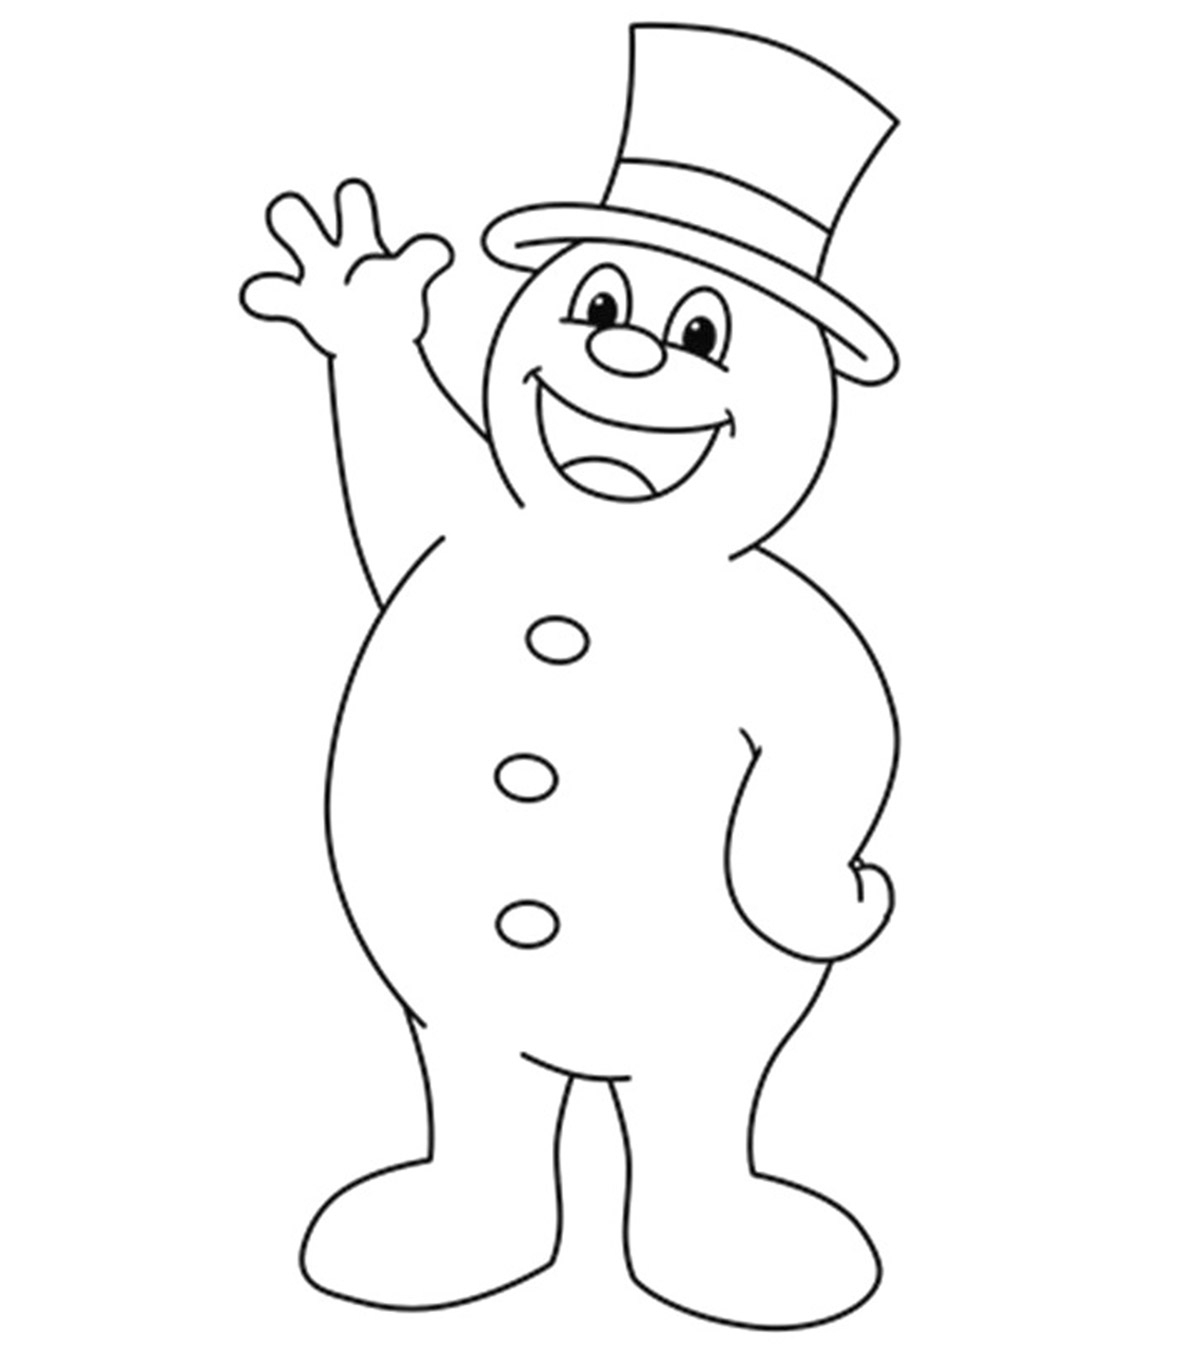 Coloring Pages Of Snowmen 10 Cute Frosty The Snowman Coloring Pages For Toddlers